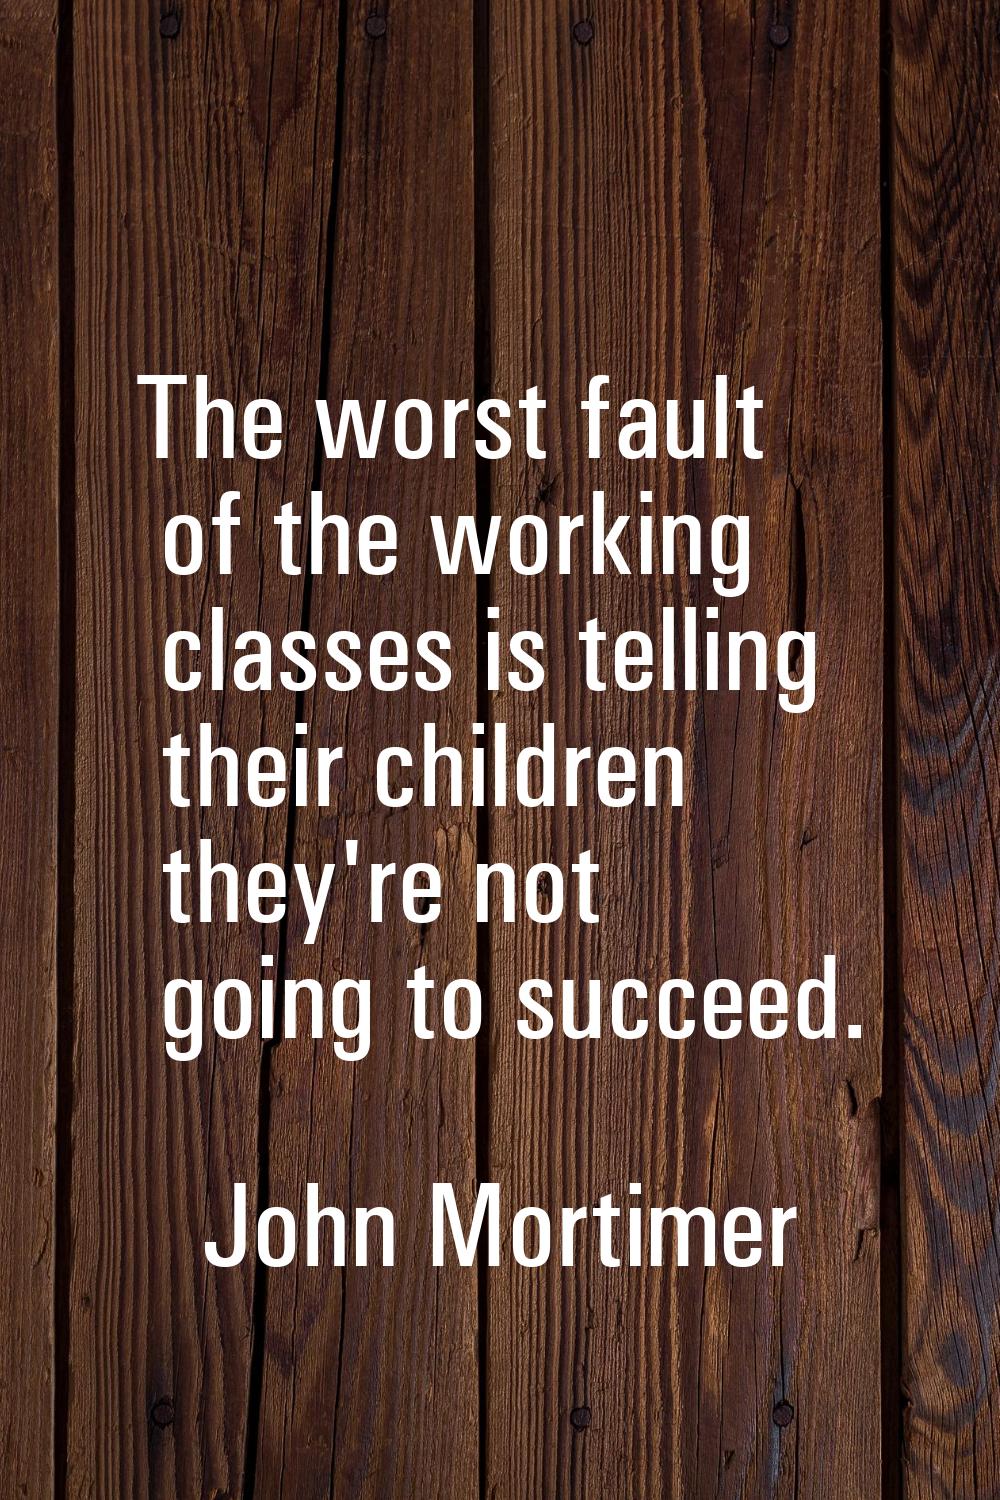 The worst fault of the working classes is telling their children they're not going to succeed.